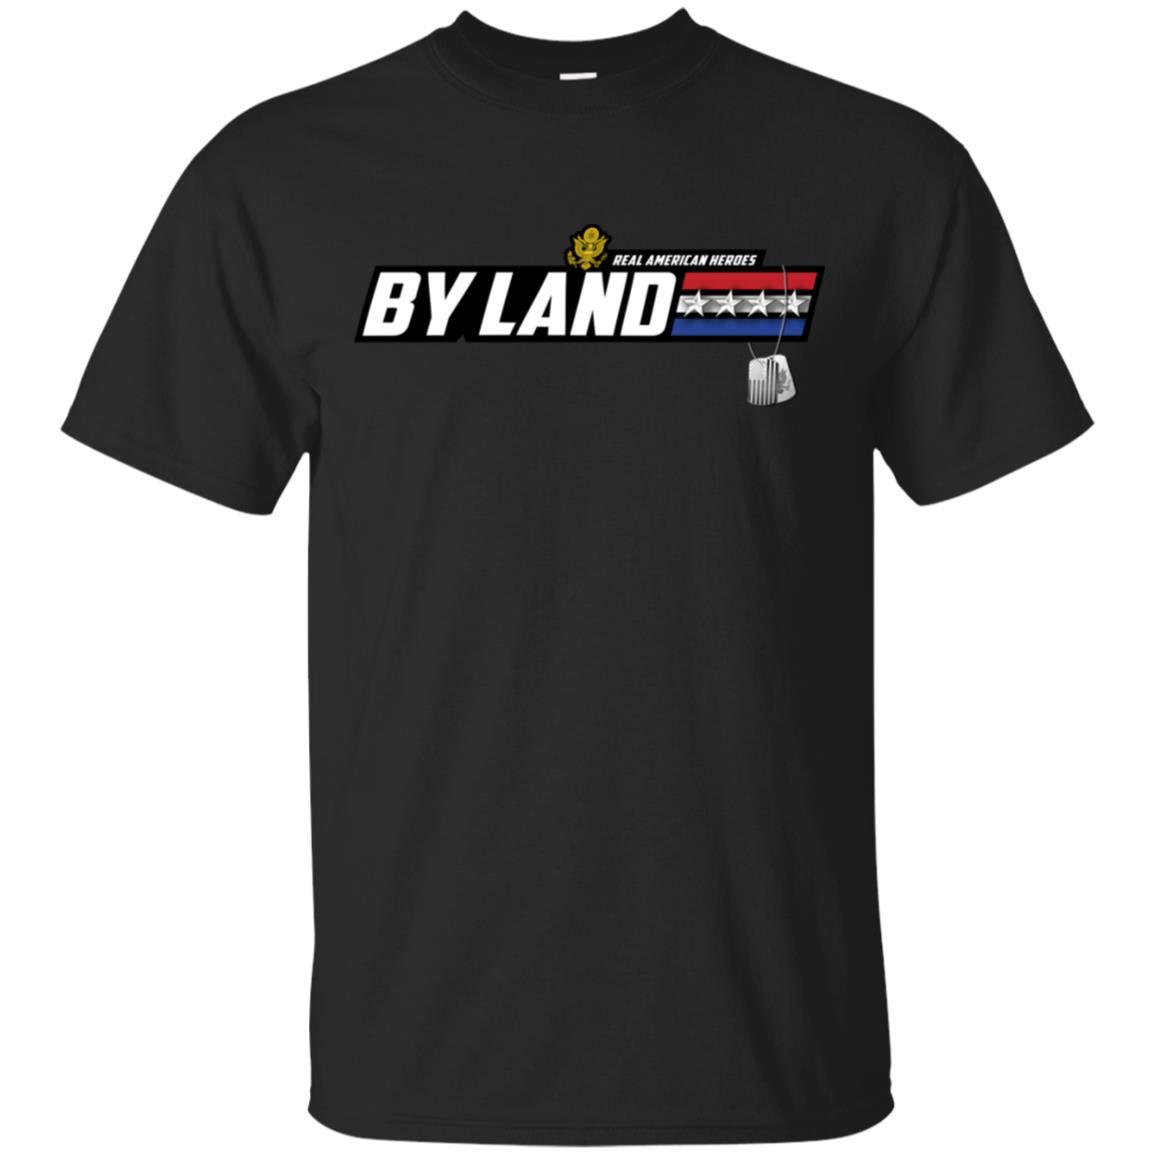 US Army T-Shirt "Real American Heroes By Land" O-10 General(GEN) On Front-TShirt-Army-Veterans Nation